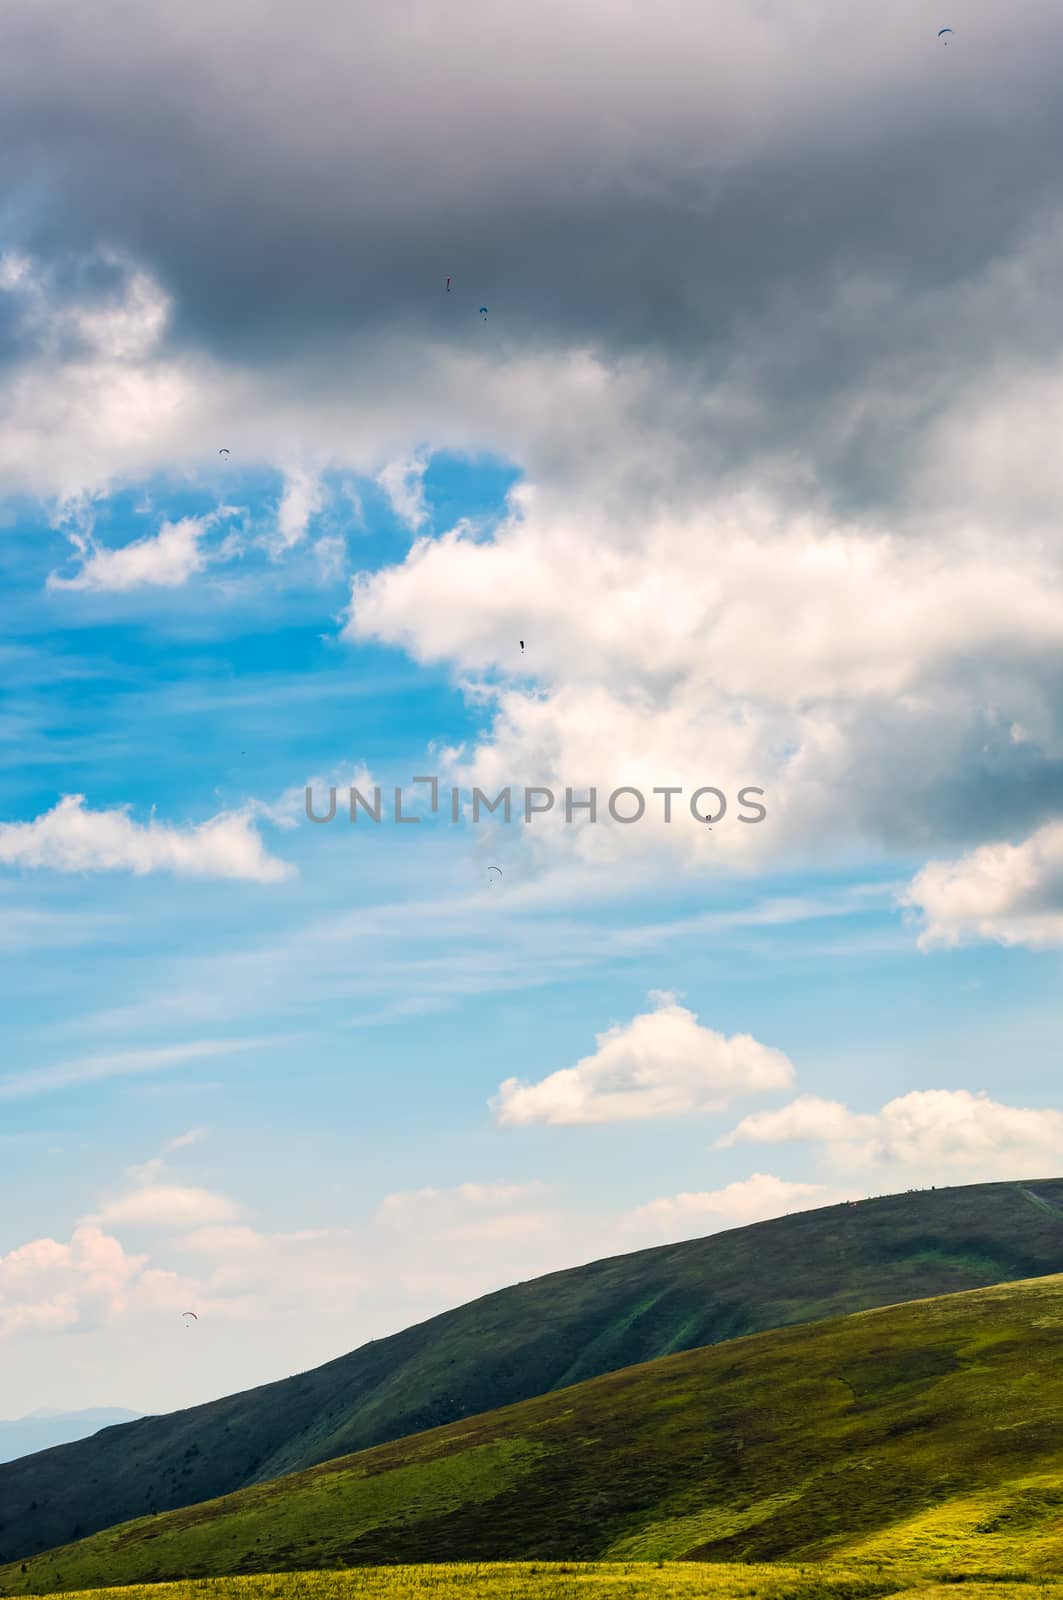 beautiful late summer landscape in carpathians. few skydivers in the flying in the sky